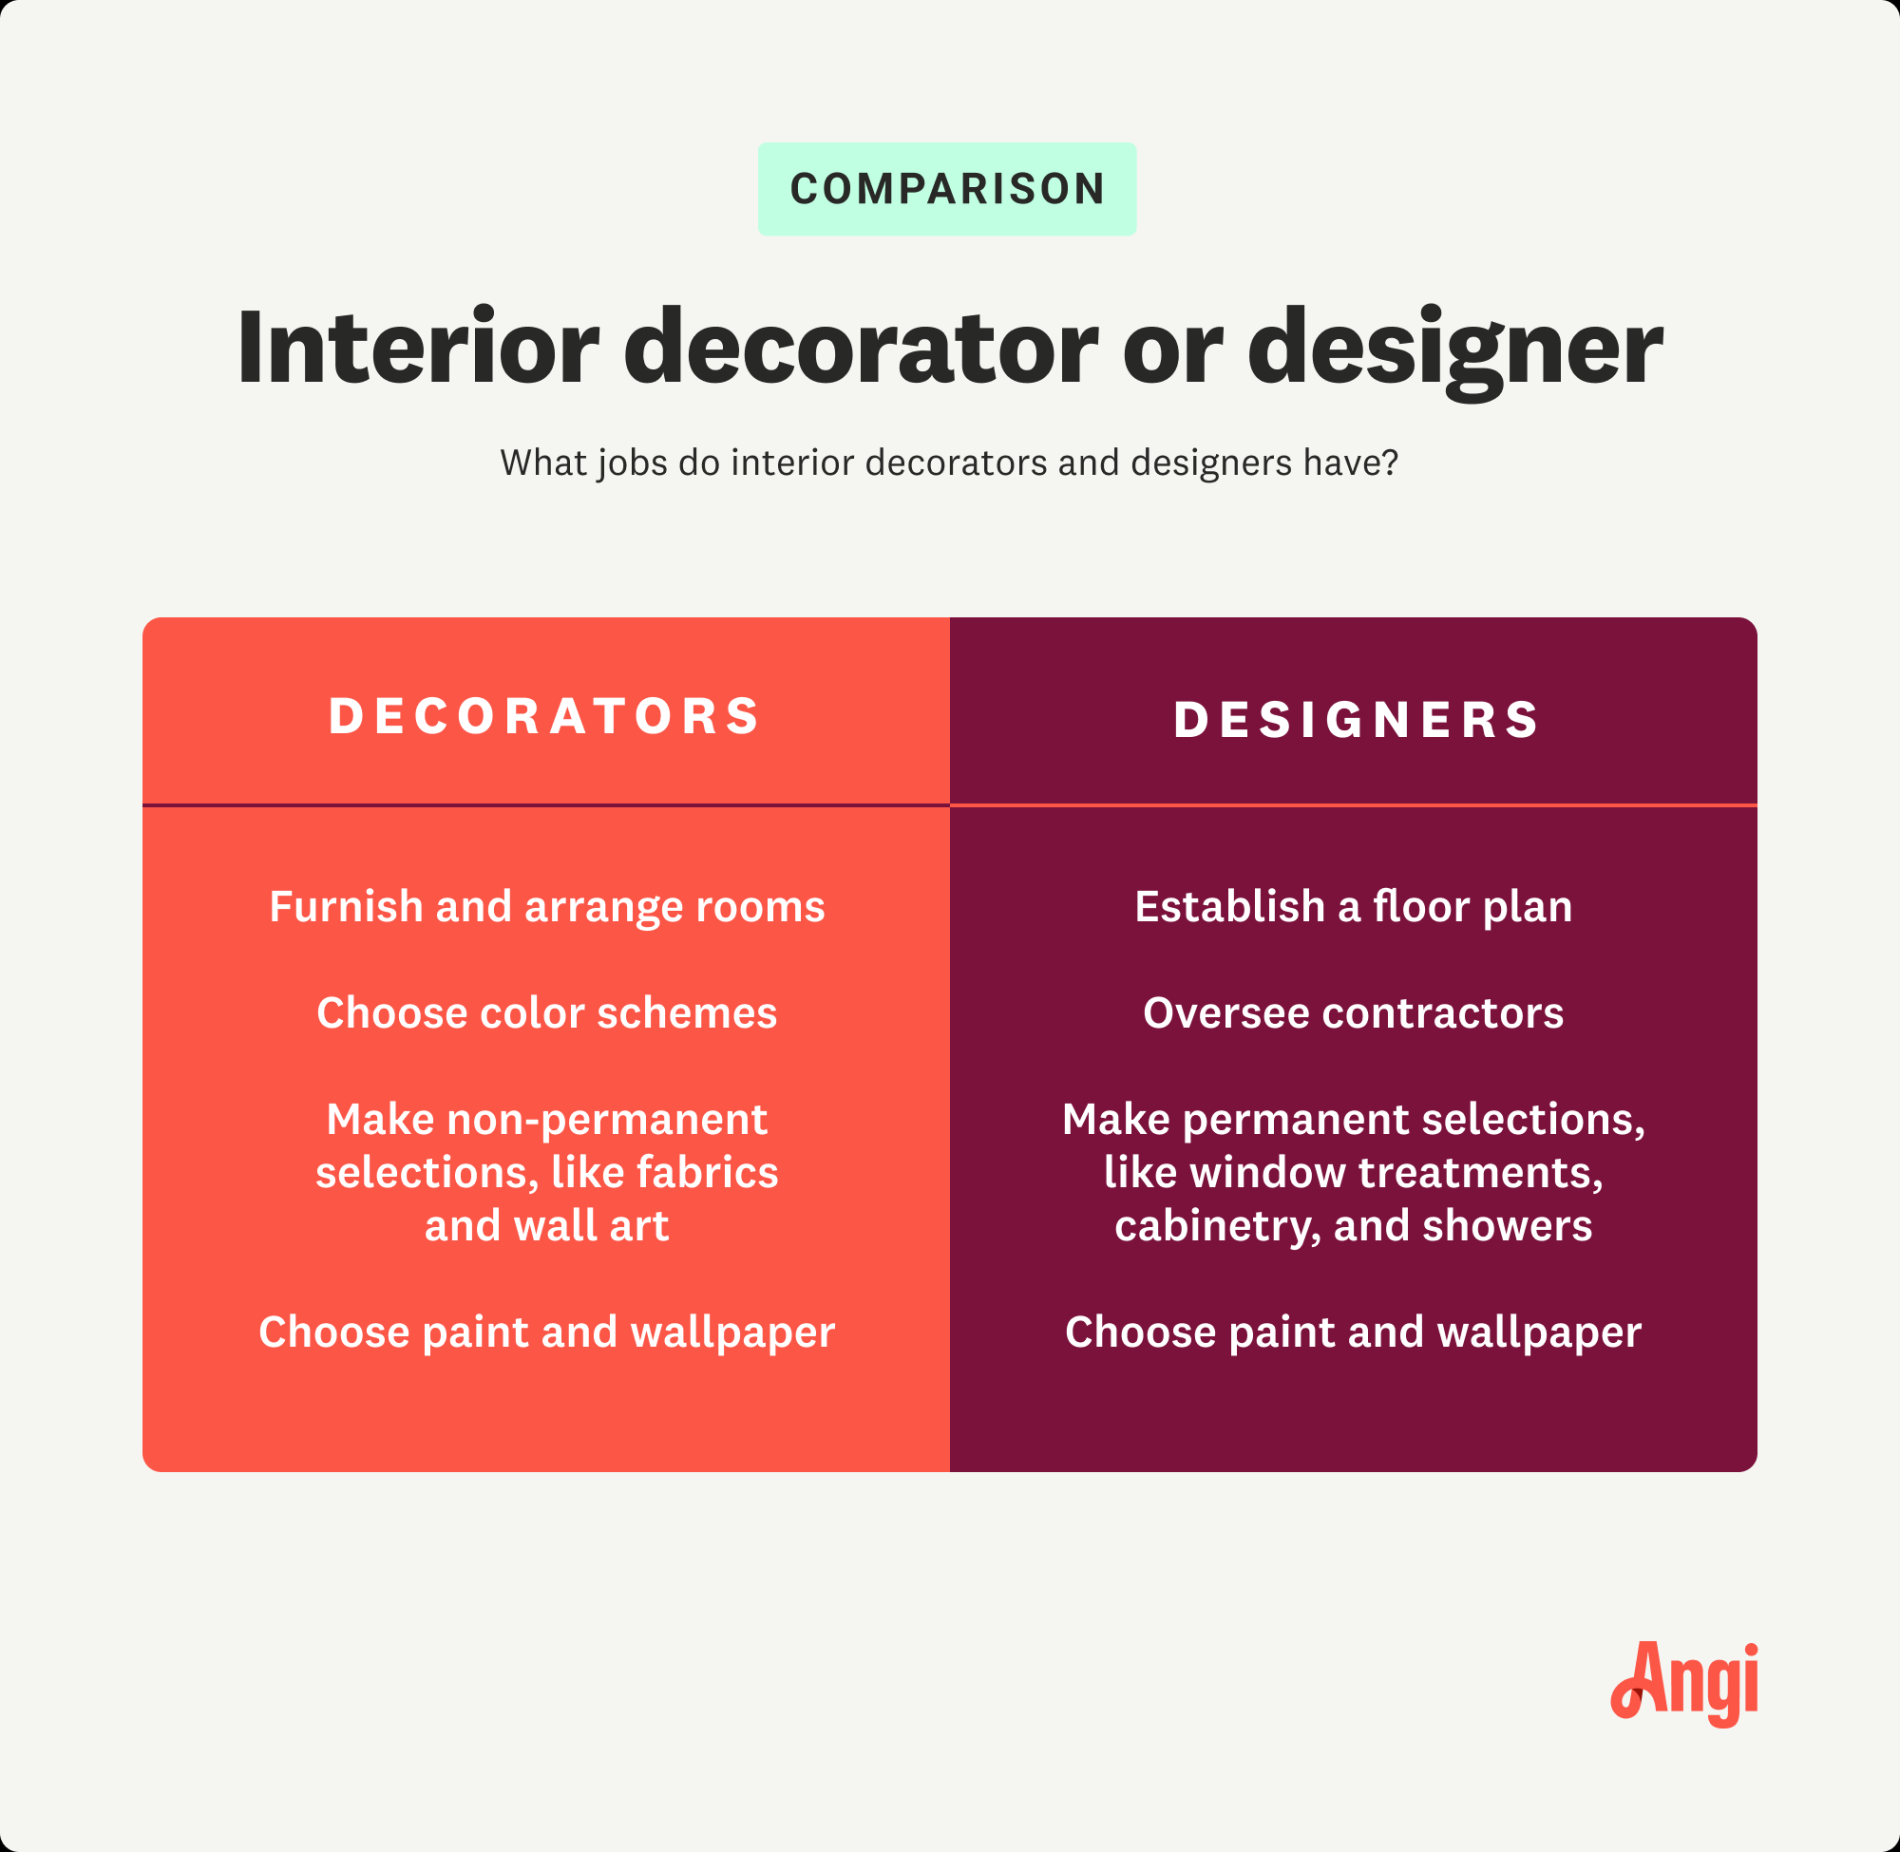 Who You Need For Your Space: Interior Decorator Or Designer?